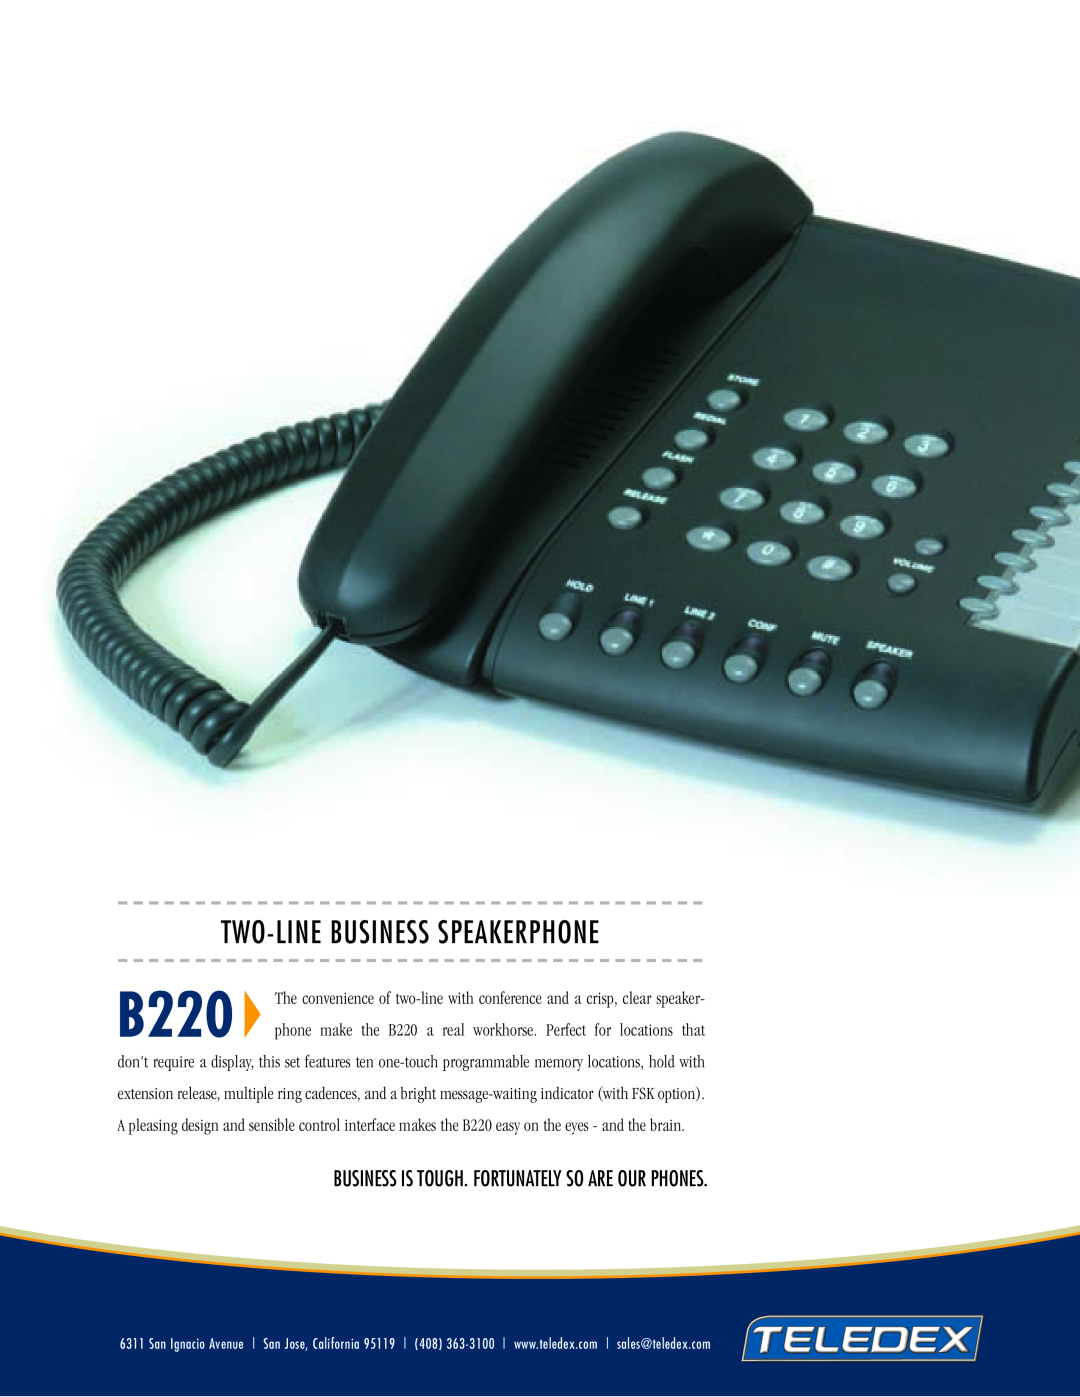 Teledex B220 manual Two-Line Business Speakerphone, Business Is Tough. Fortunately So Are Our Phones 